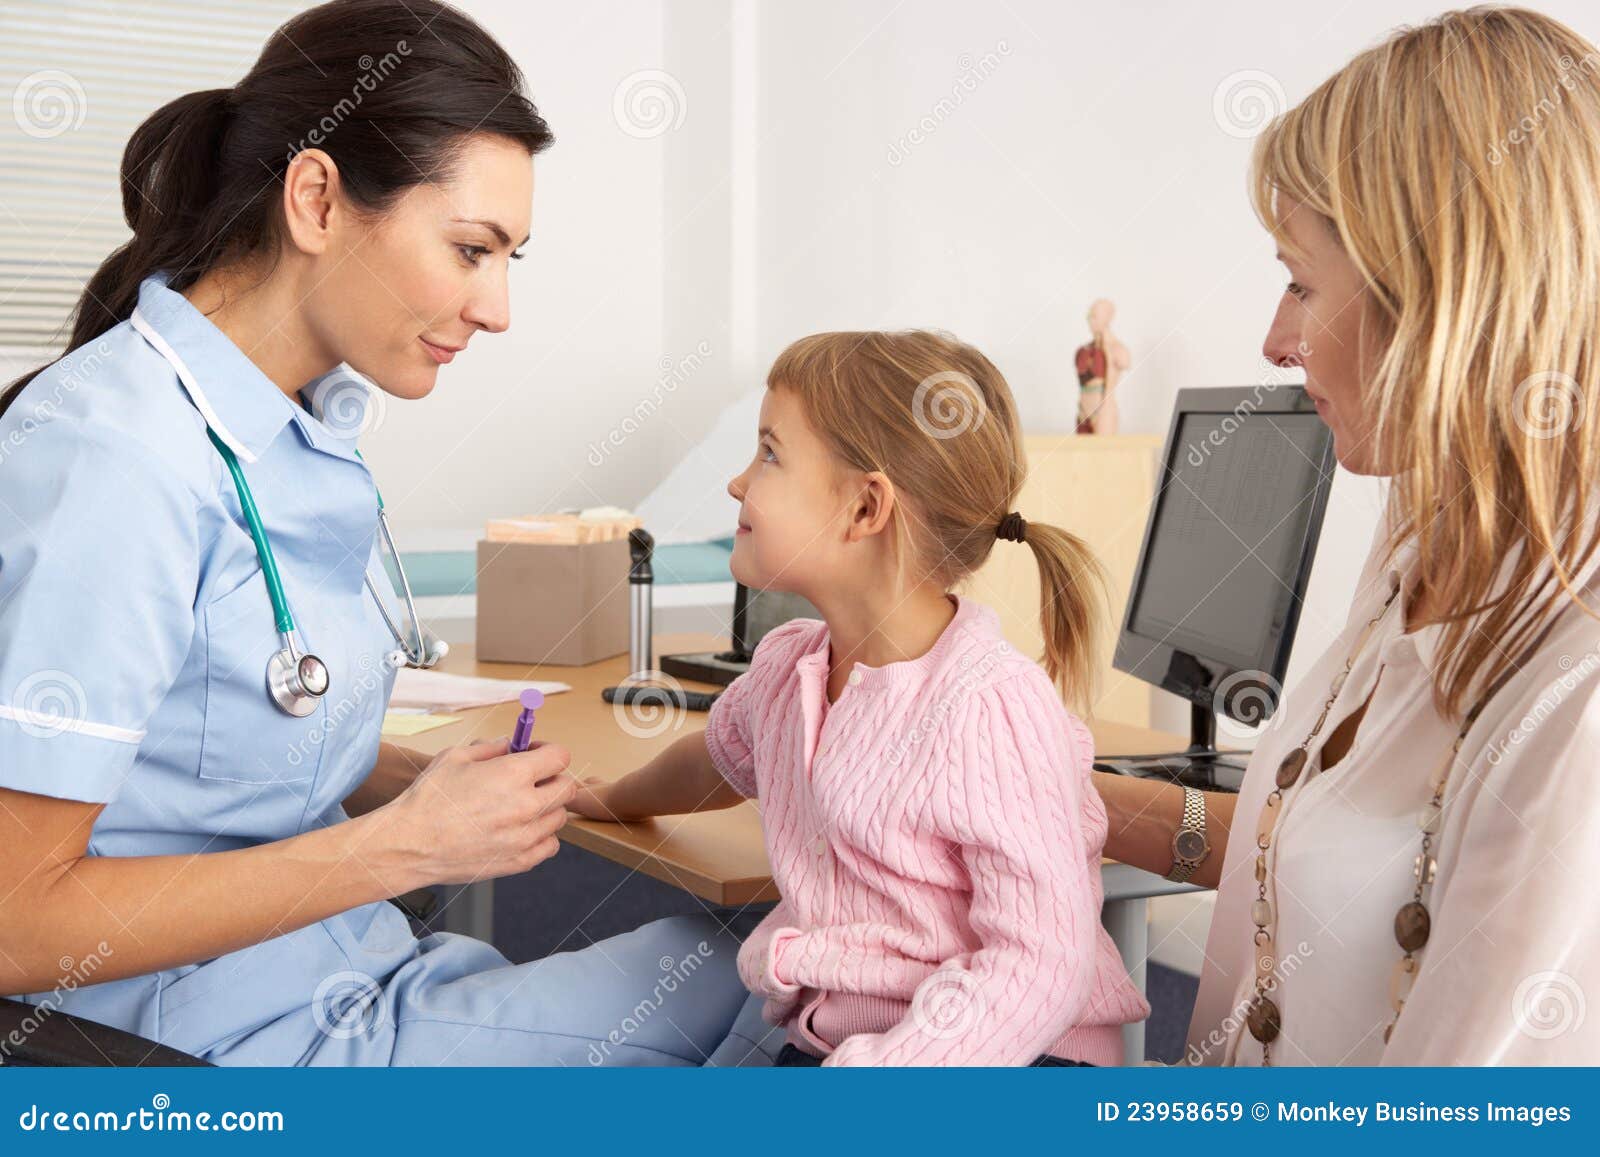 british nurse about to inject young child